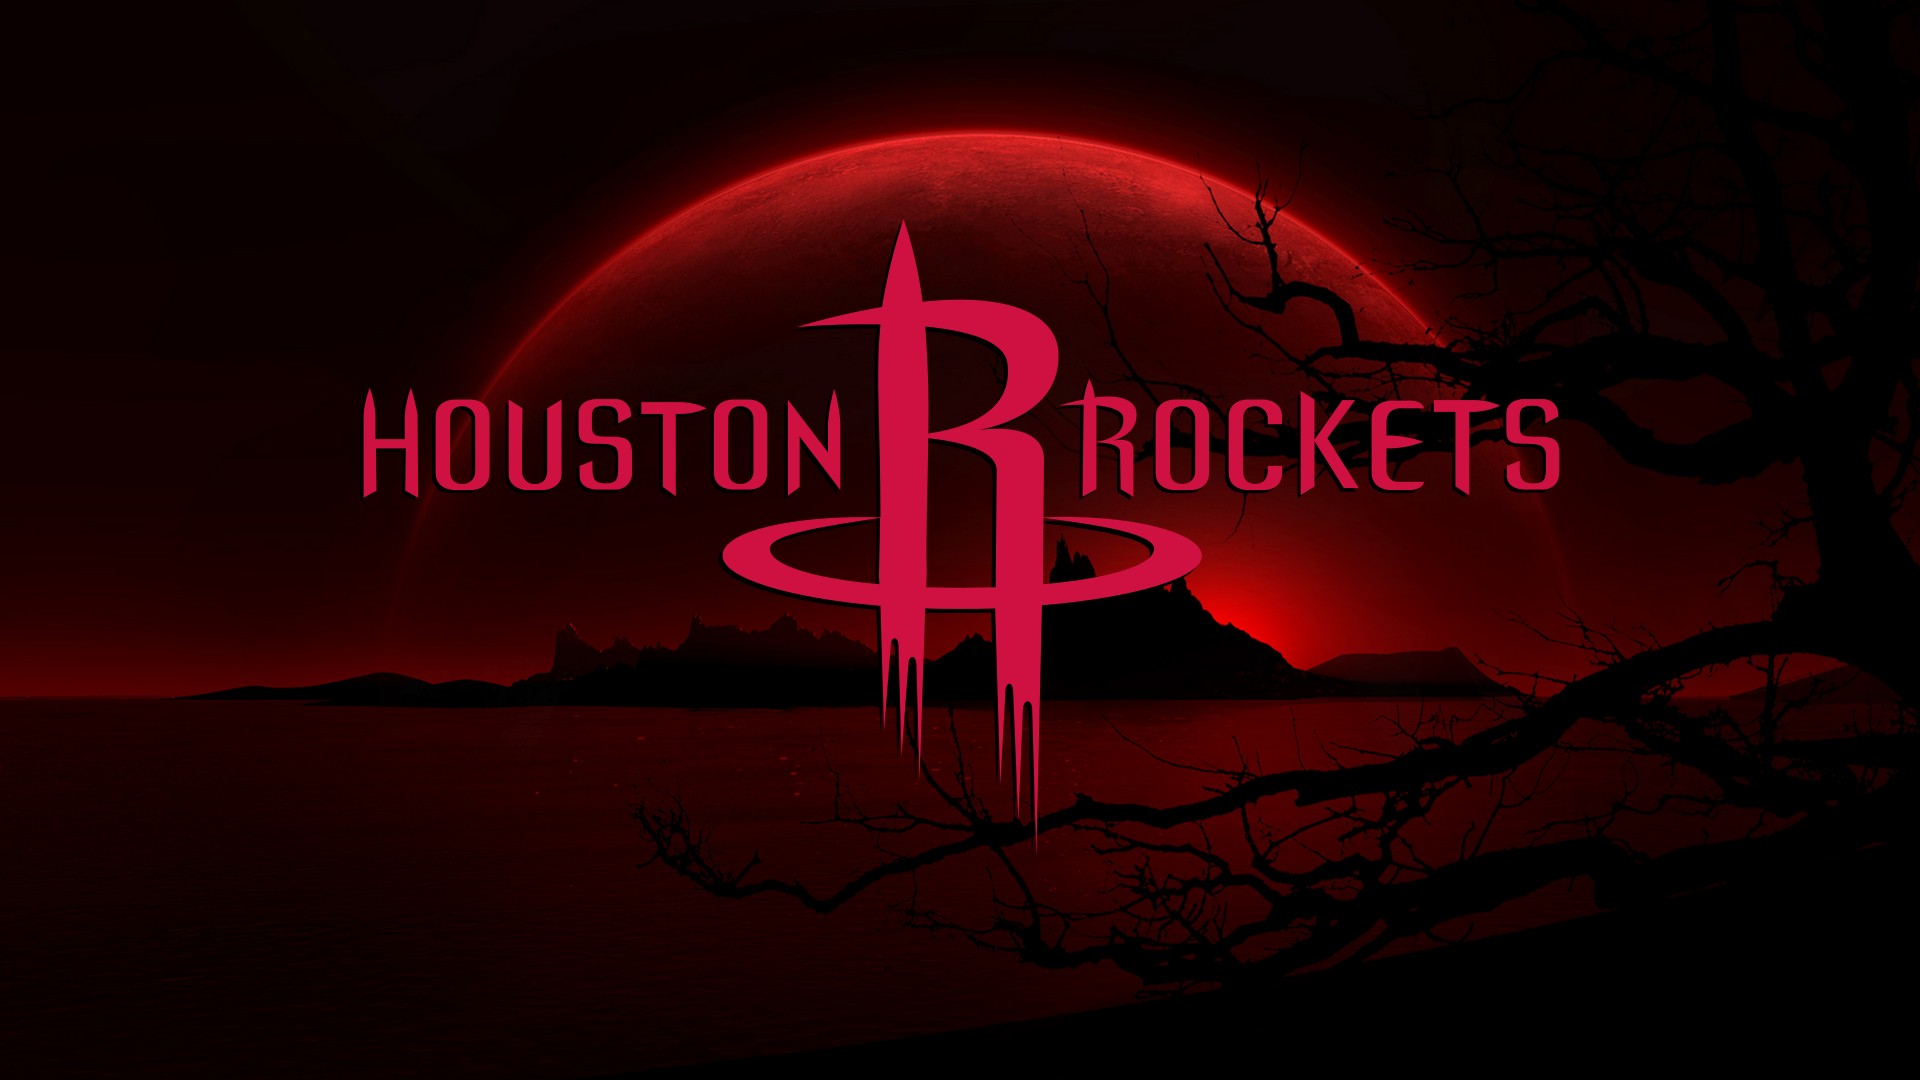 HD Houston Rockets Backgrounds with image dimensions 1920x1080 pixel. You can make this wallpaper for your Desktop Computer Backgrounds, Windows or Mac Screensavers, iPhone Lock screen, Tablet or Android and another Mobile Phone device